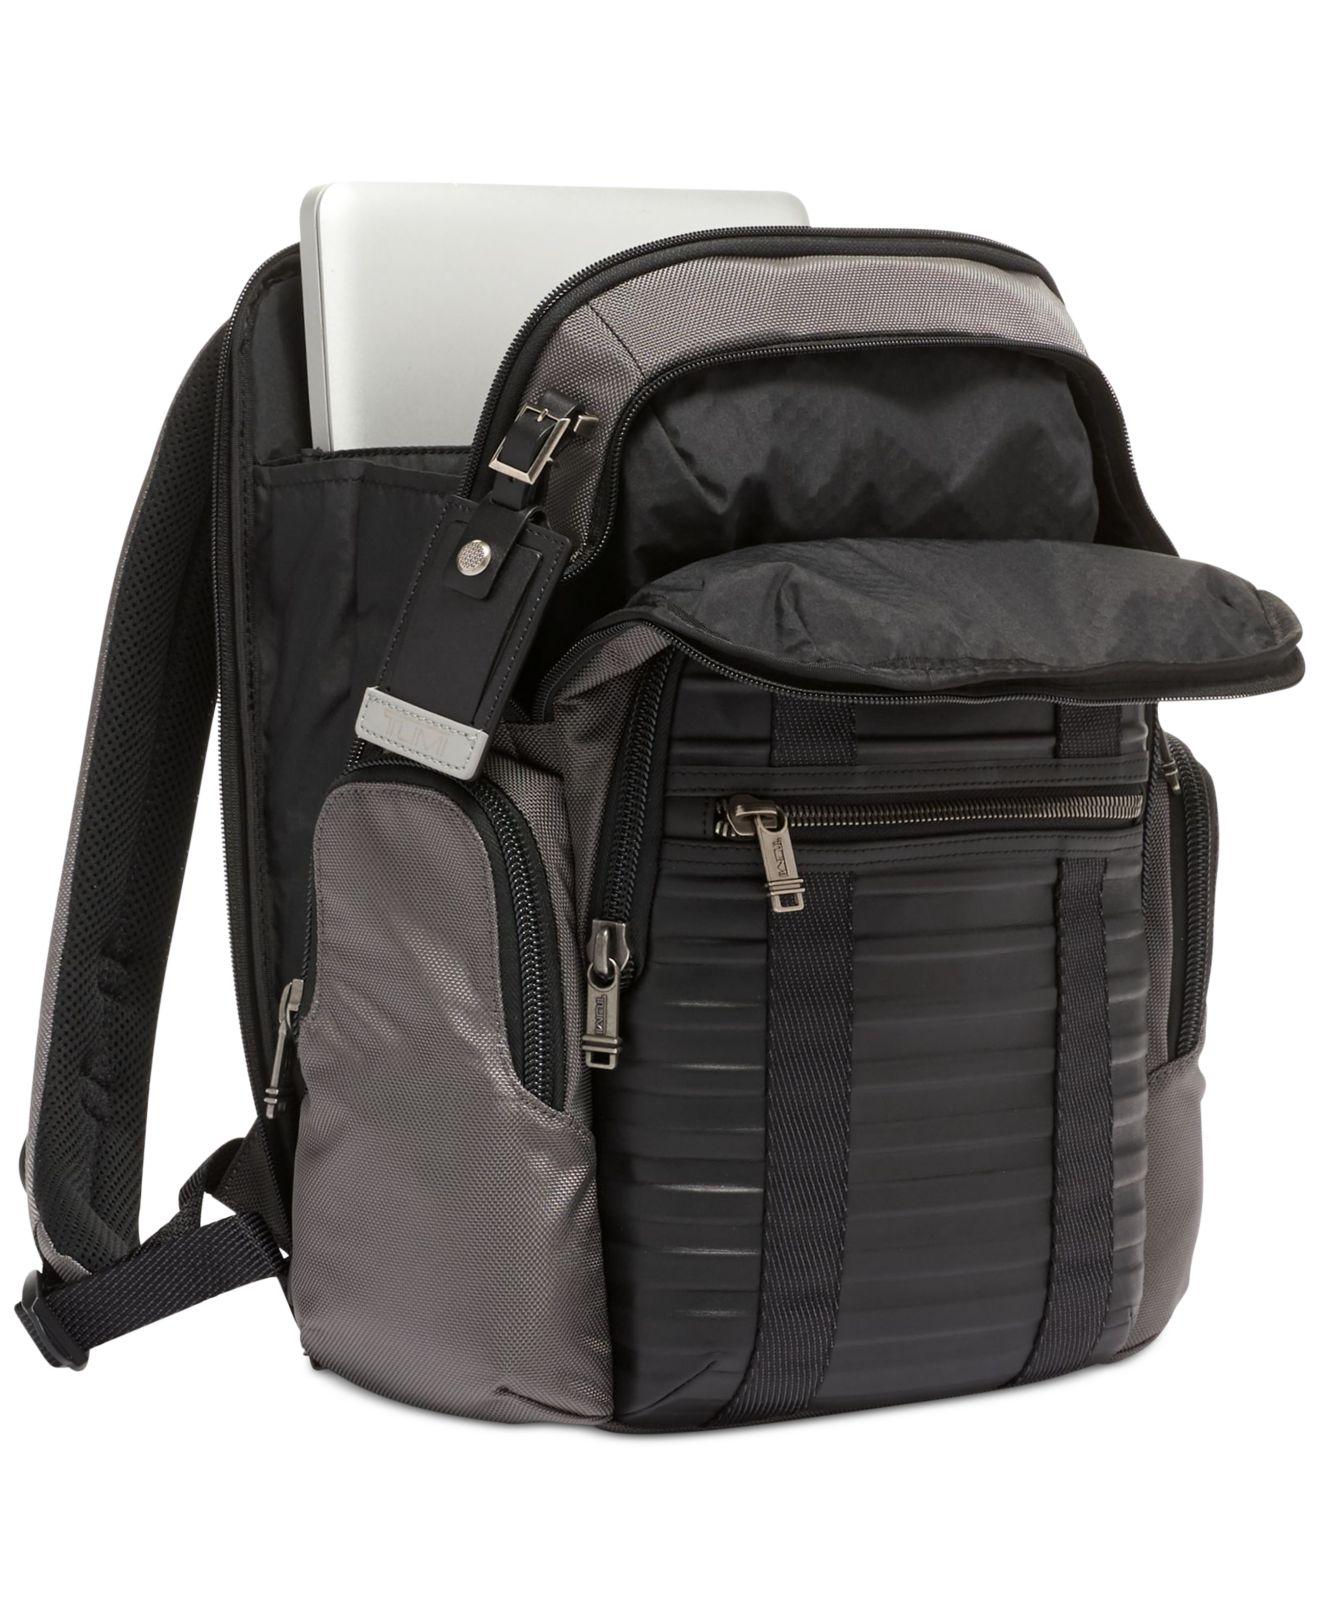 Tumi Synthetic Alpha Bravo Nellis Backpack in Gray for Men - Lyst